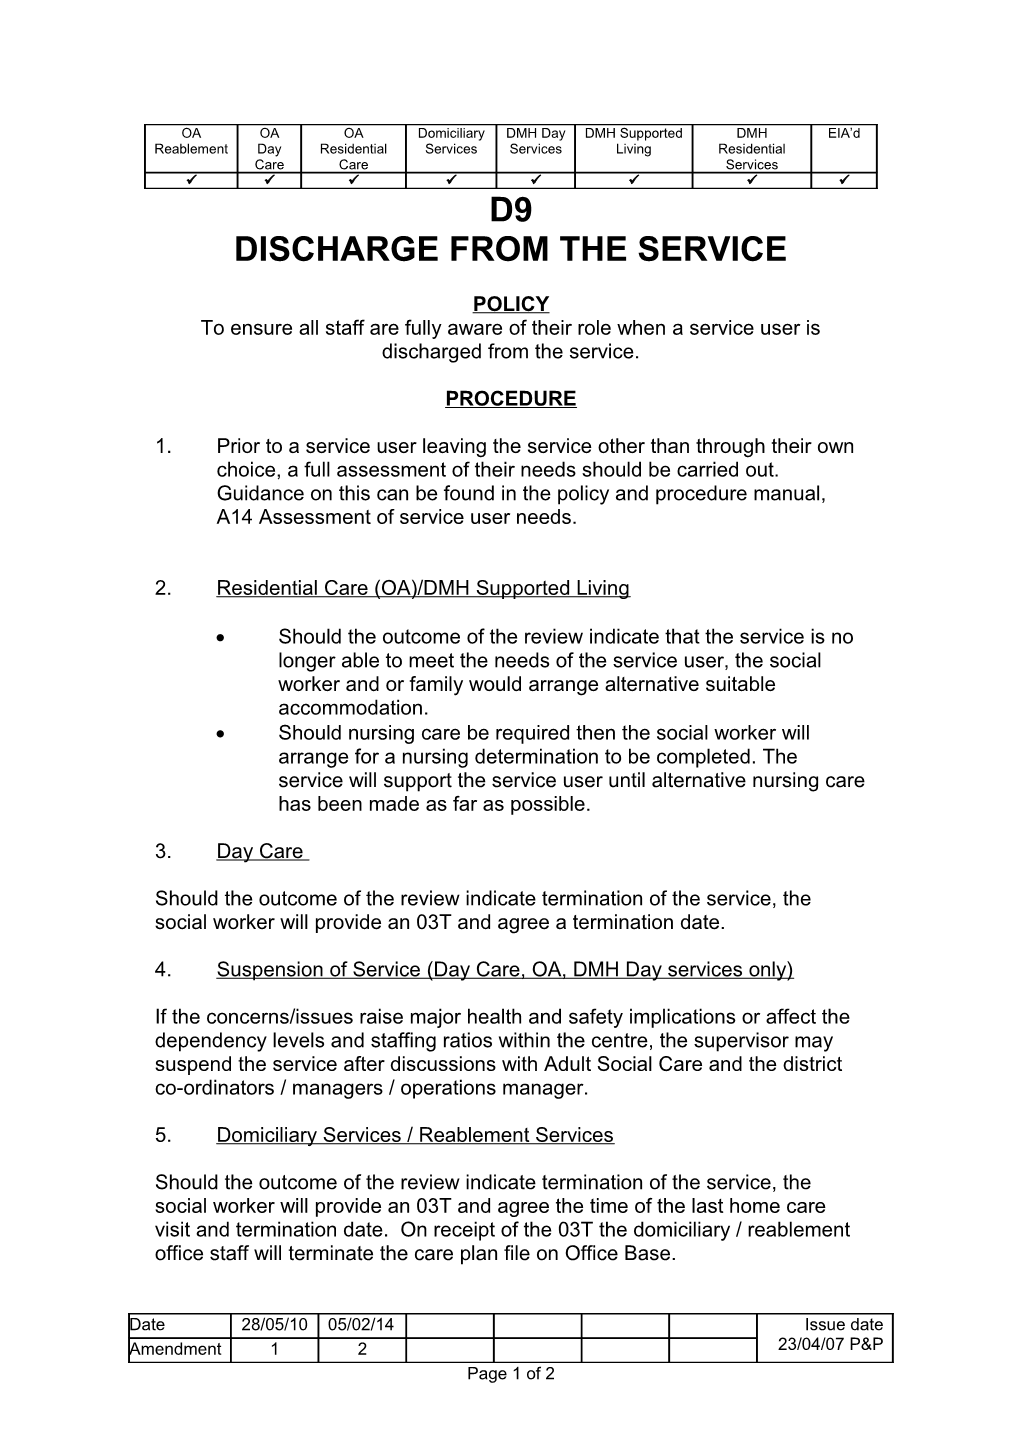 To Ensure All Staff Are Fully Aware of Their Role When a Service User Is Discharged From